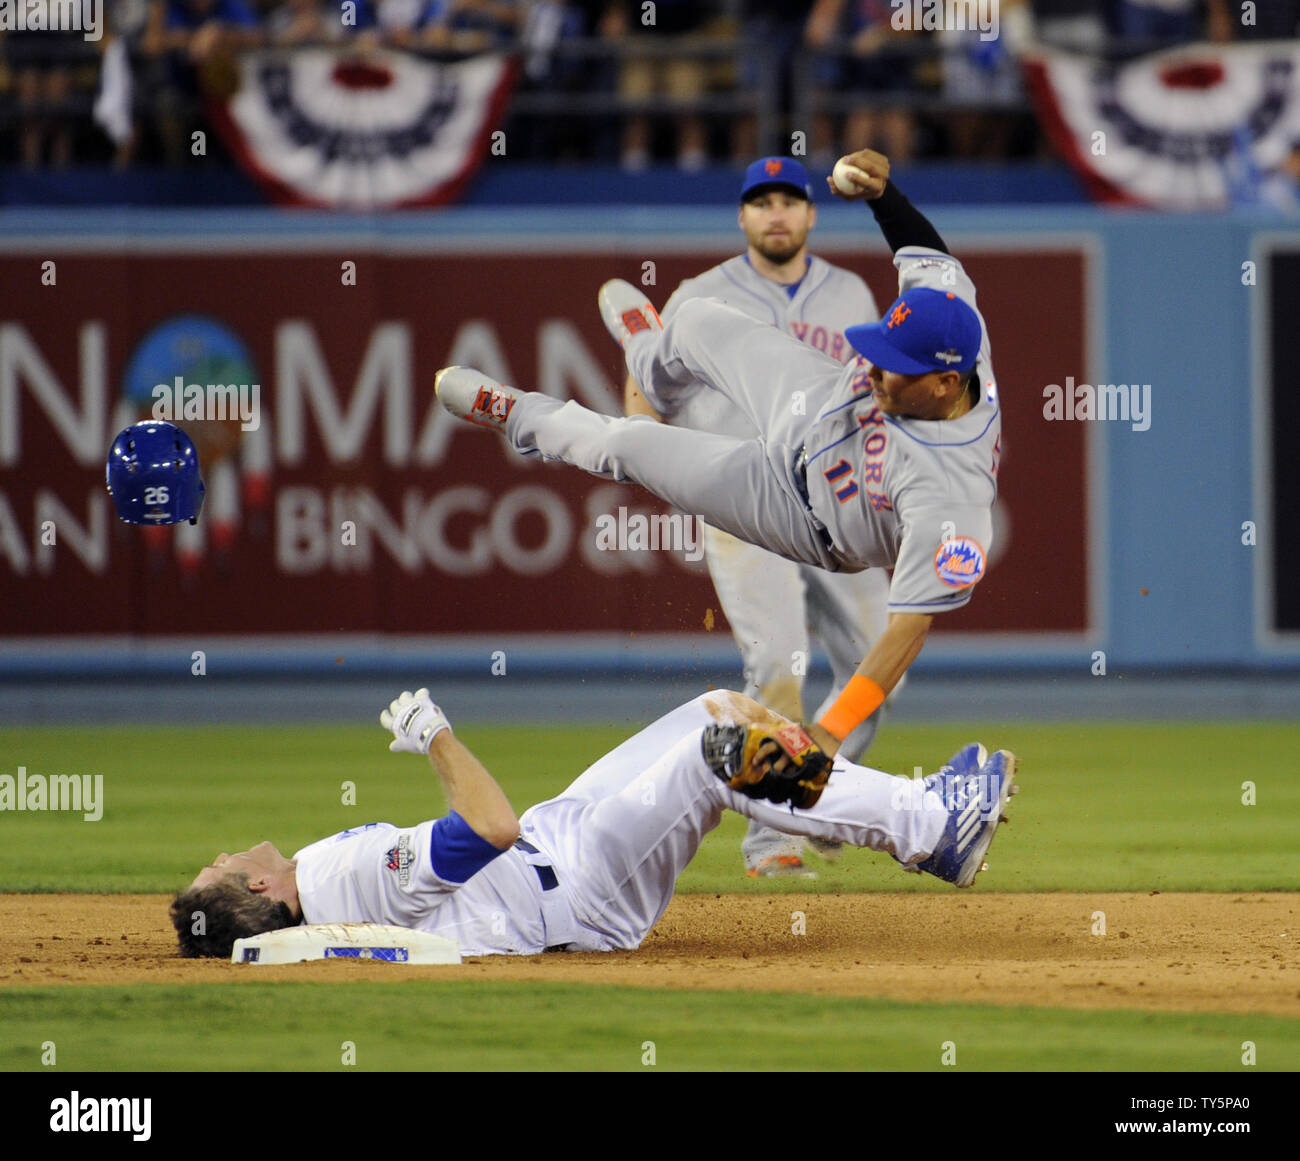 Los Angeles Dodgers' Chase Utley breaks up the double play as New York Mets' short stop Ruben Tejada goes airborne in the seventh inning in game 2 of the National League Division Series at Dodgers Stadium in Los Angeles on October10, 2015. Tejada suffered a fractured right fibula on the play. Photo by Lori Shepler/UPI Stock Photo